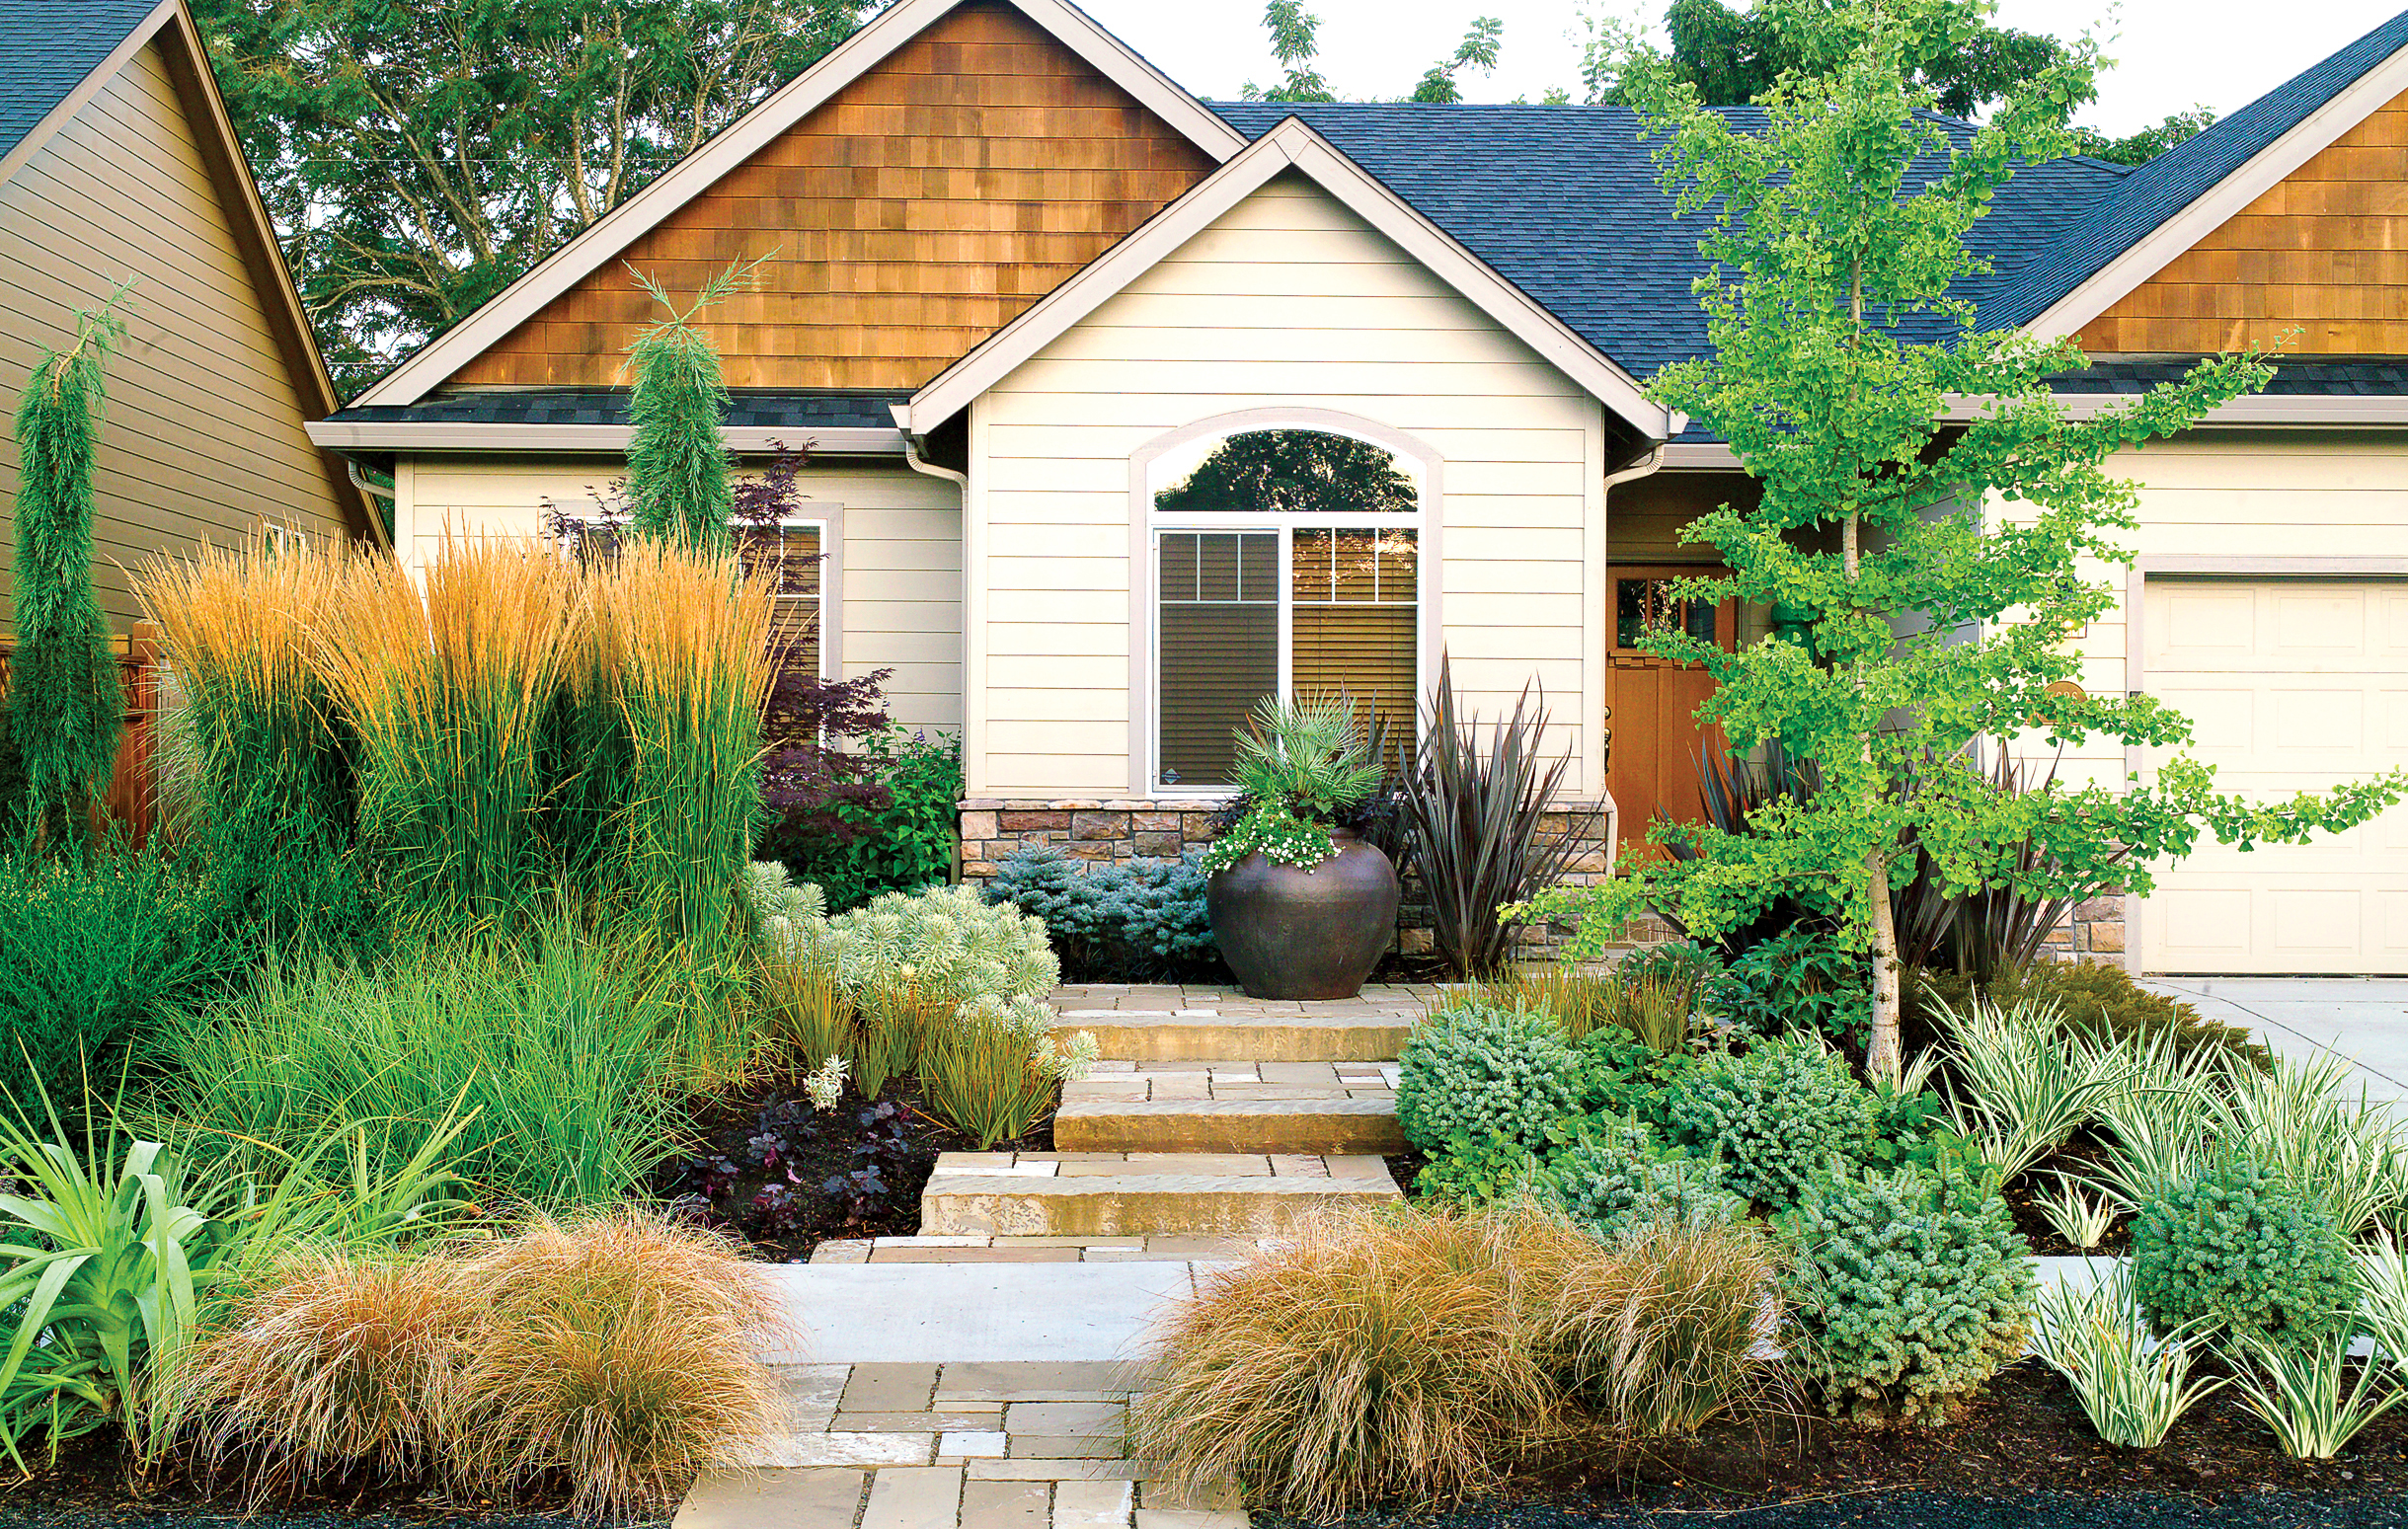 49 Landscaping Ideas with Stone